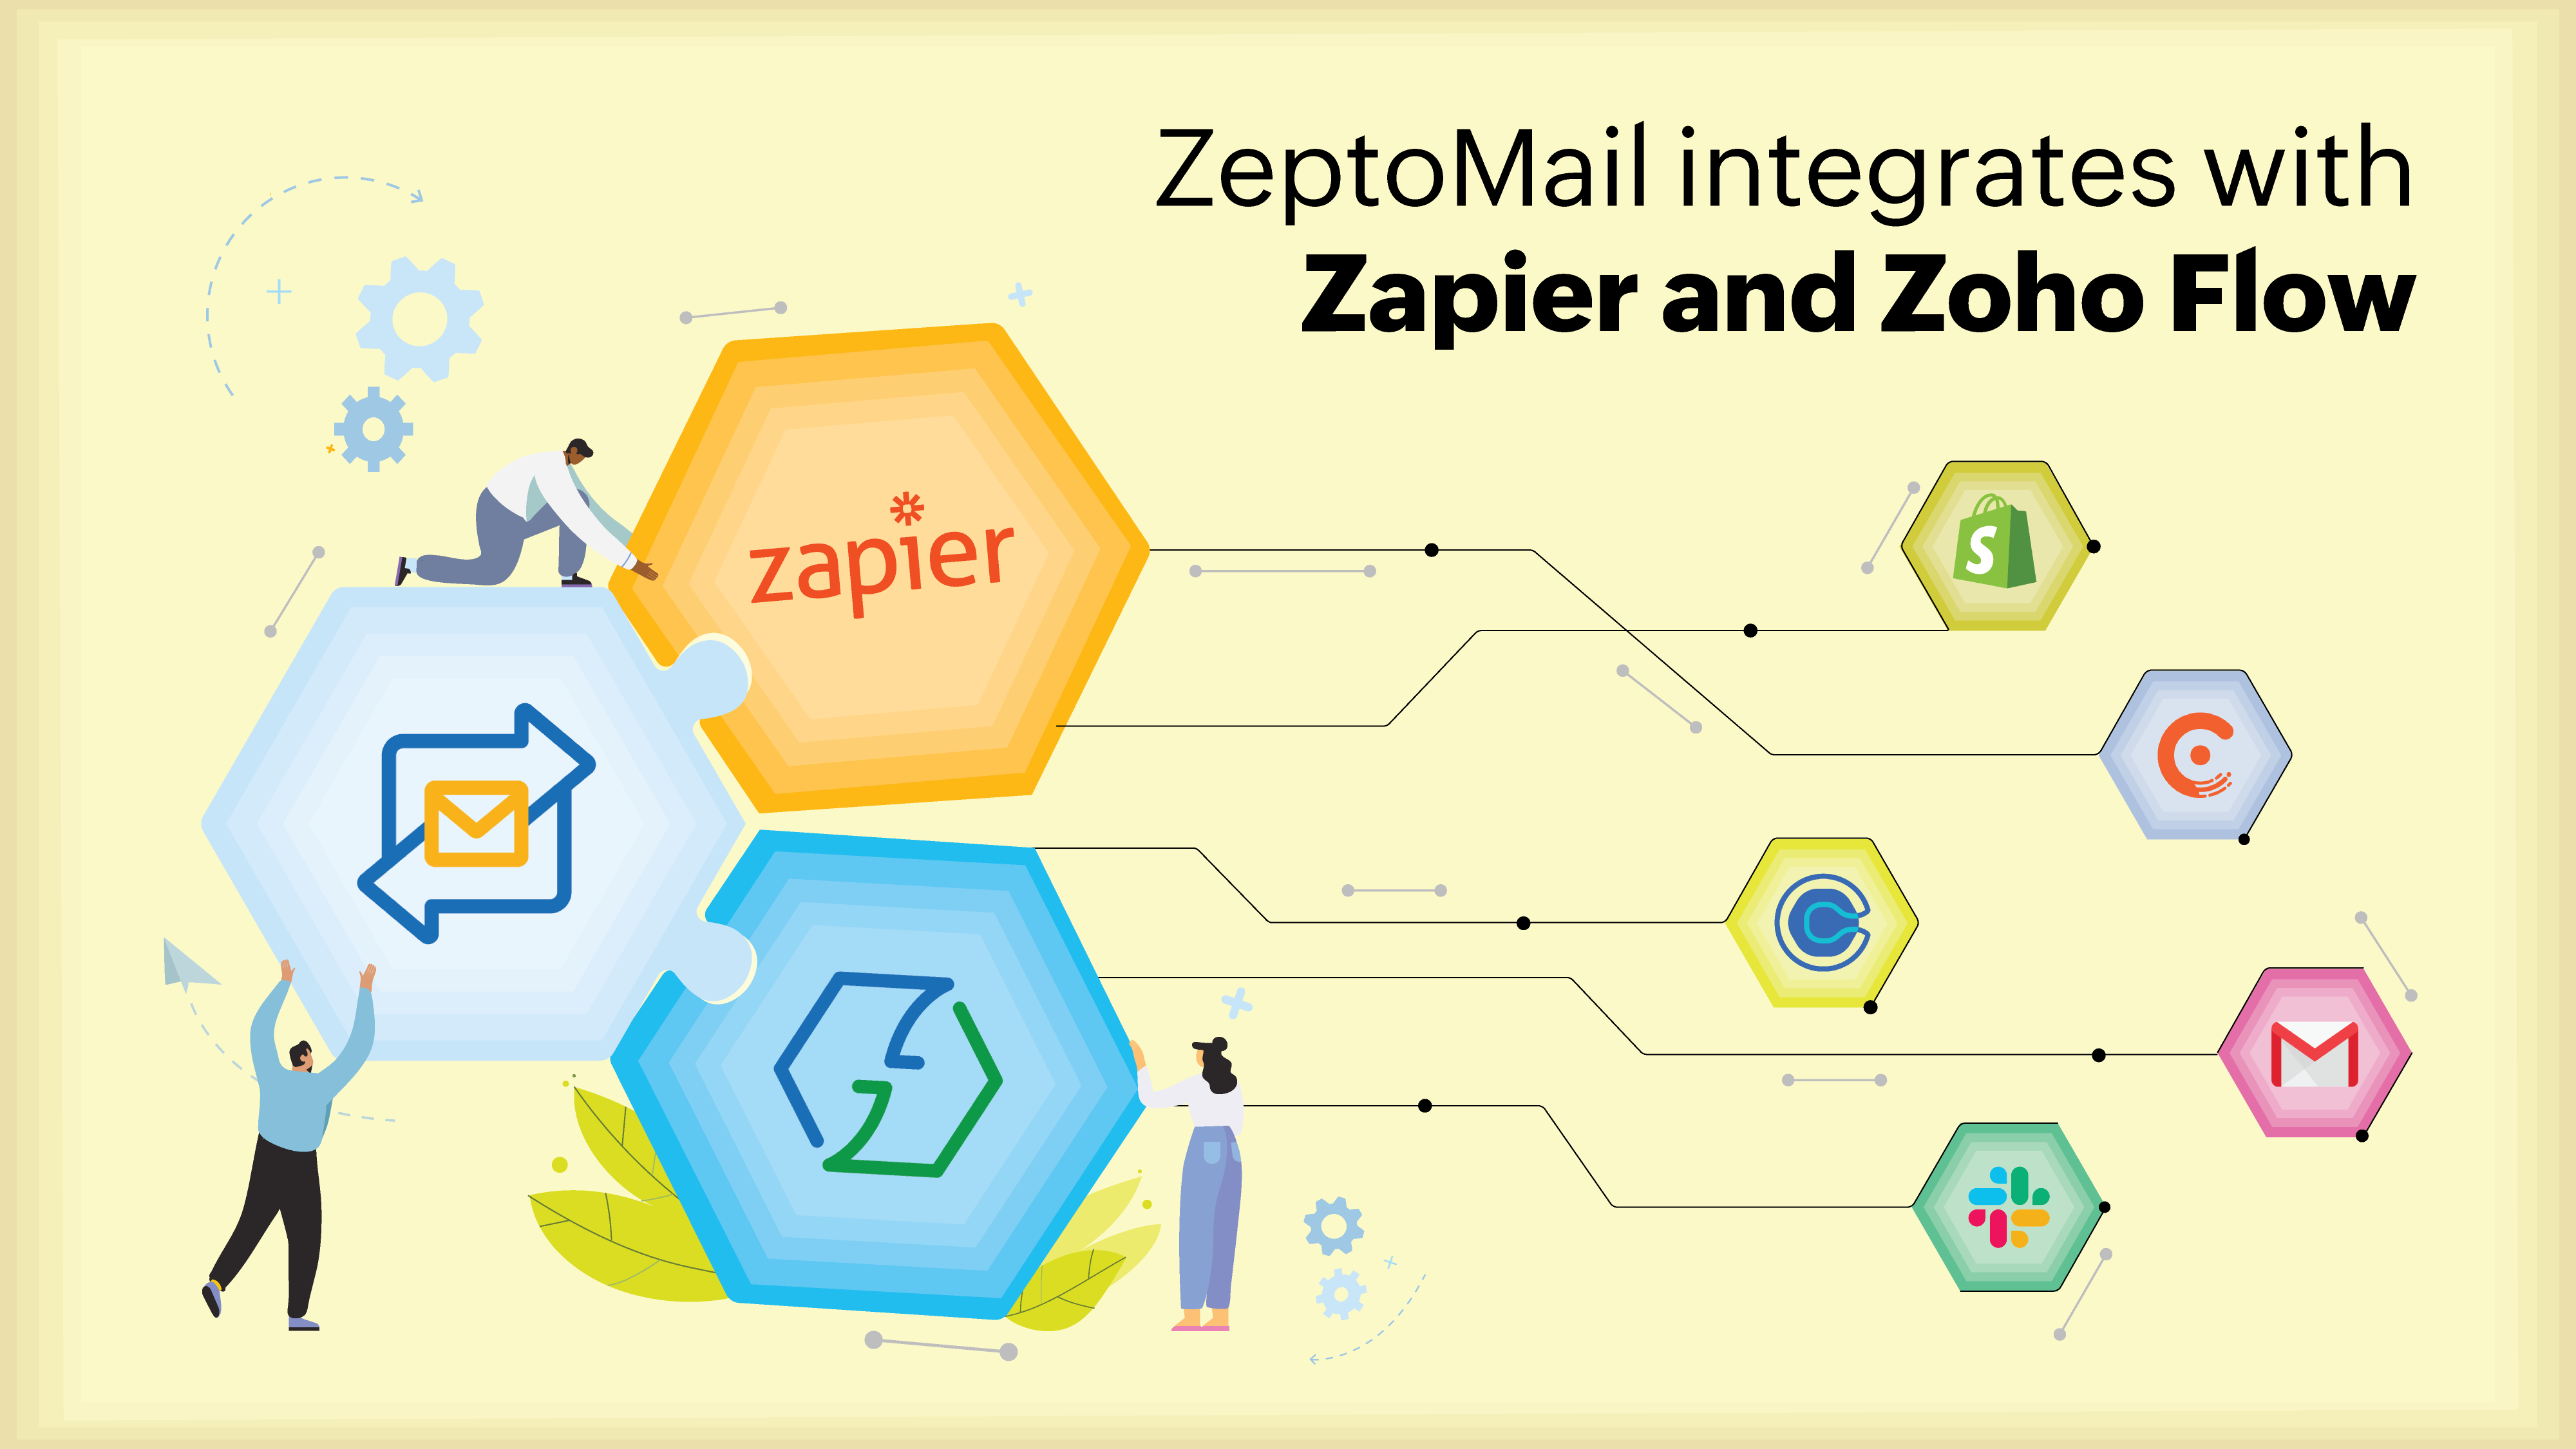 Introducing ZeptoMail’s integration with Zapier and Zoho Flow